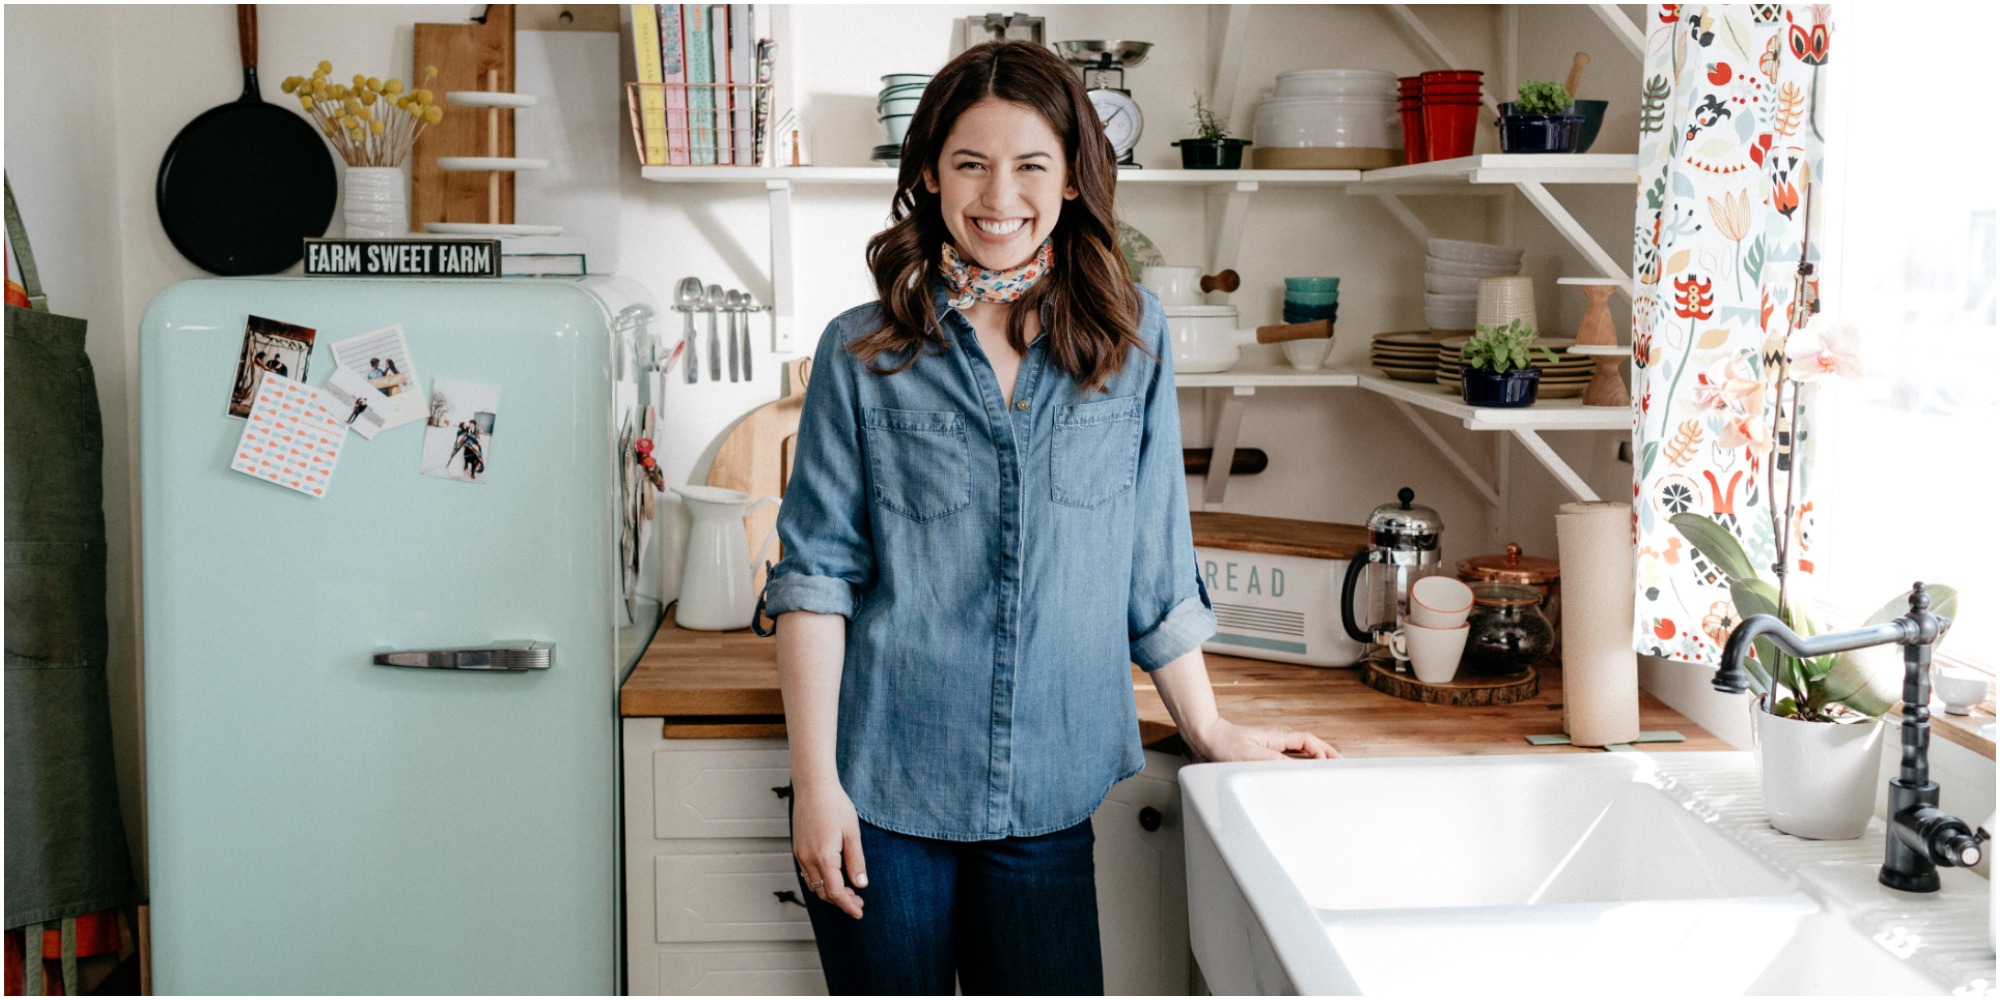 Molly Yeh in her home kitchen on the set of Girl Meets Farm.